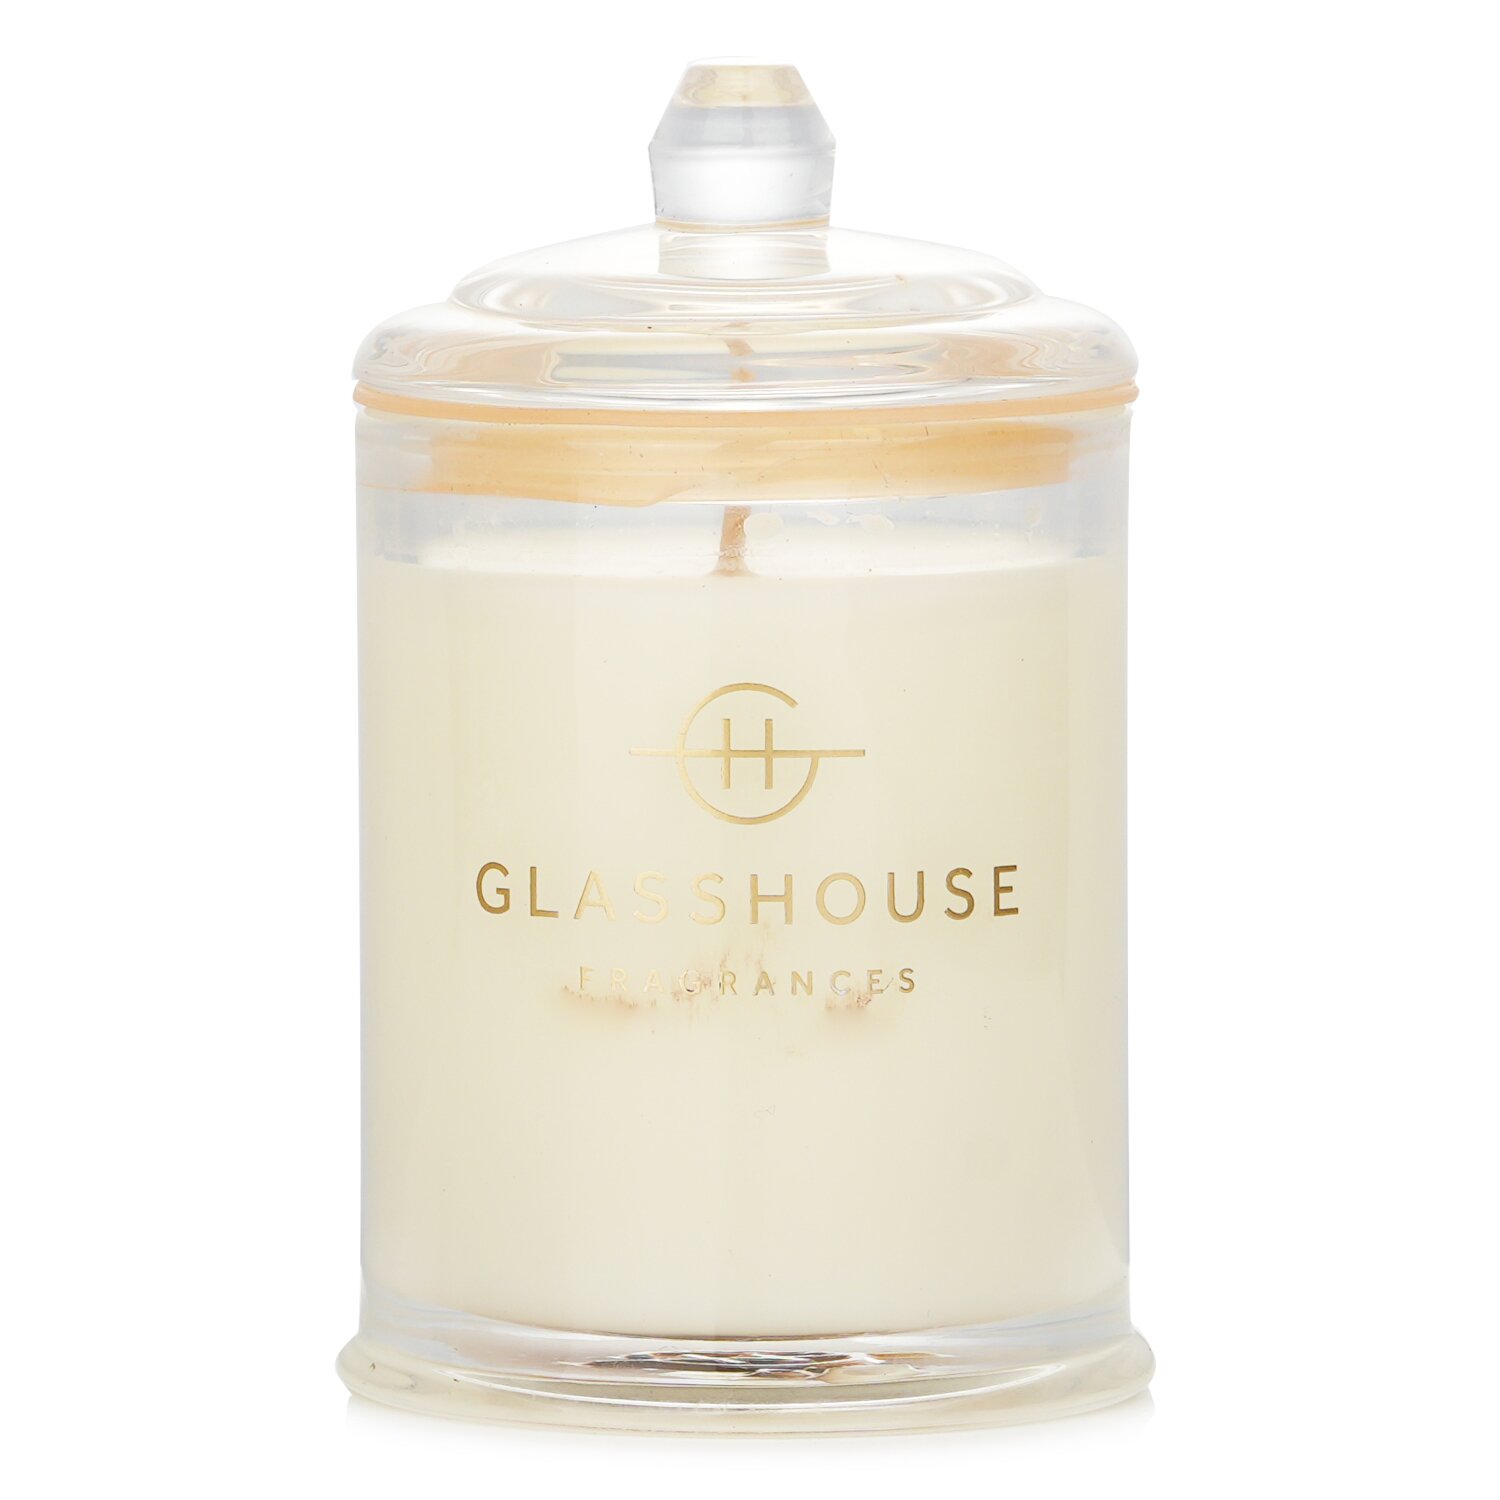 Glasshouse Triple Scented Soy Candle - Kyoto In Bloom (Camellia & Lotus) 60g/2.1oz